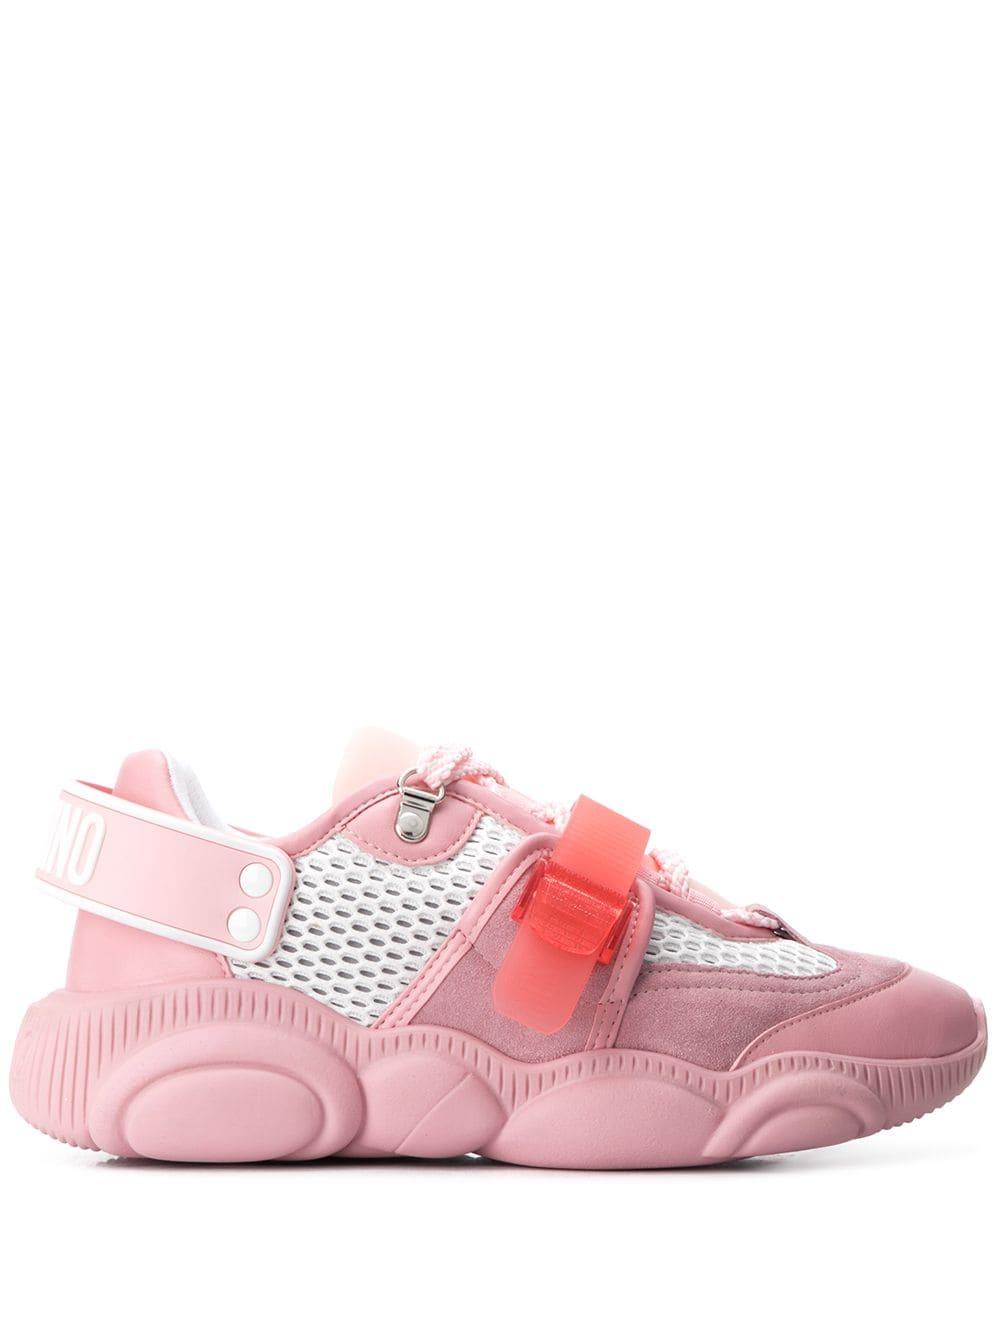 Moschino Teddy Sneakers in Pink | Lyst